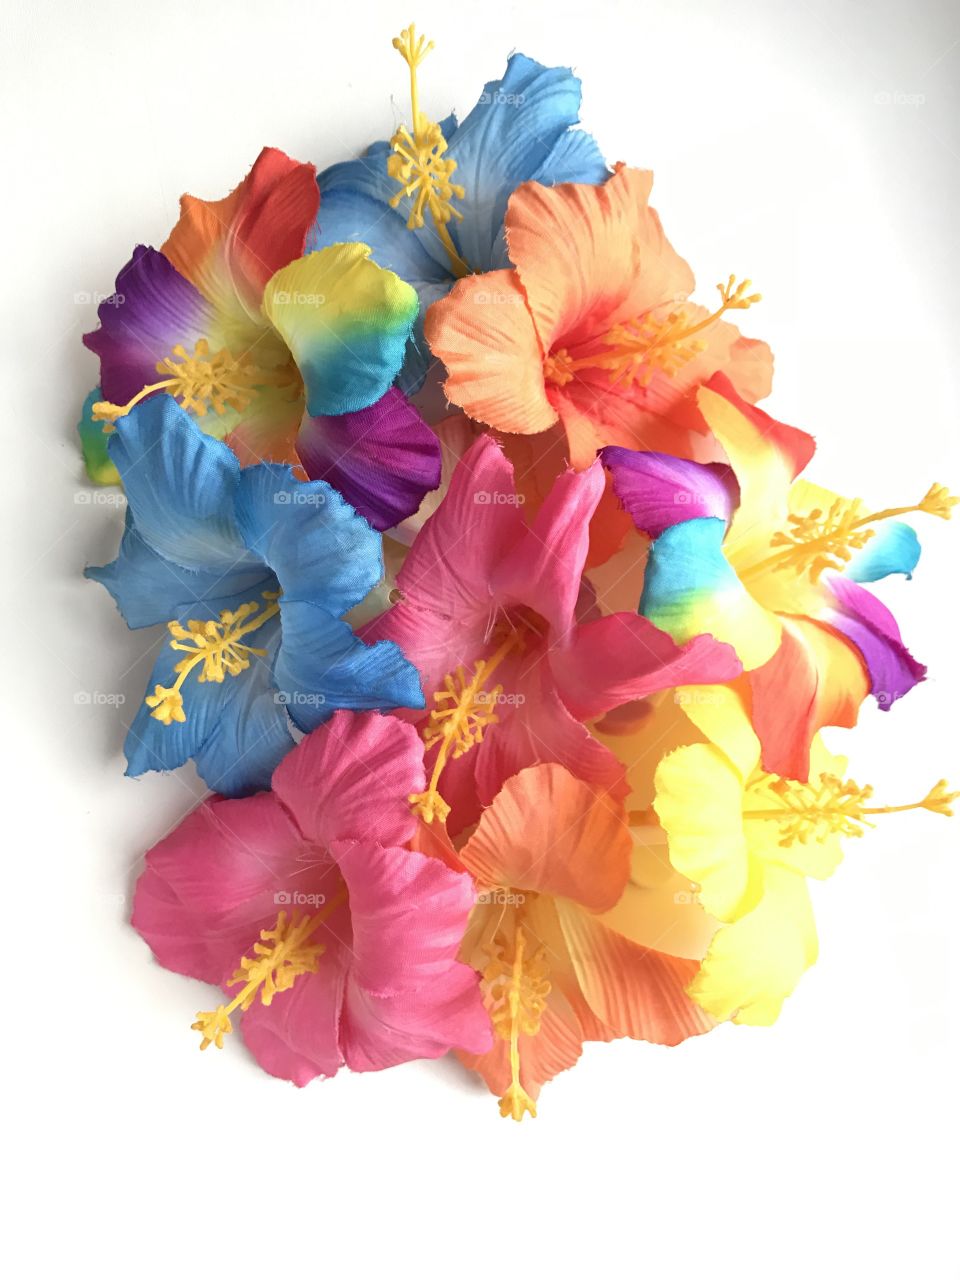 Bright multicolored flowers on a white background. Lily, hibiscus, stamen, pistil, petal. Blue flower. Yellow flower. Pink flower. Orange flower. Color love.